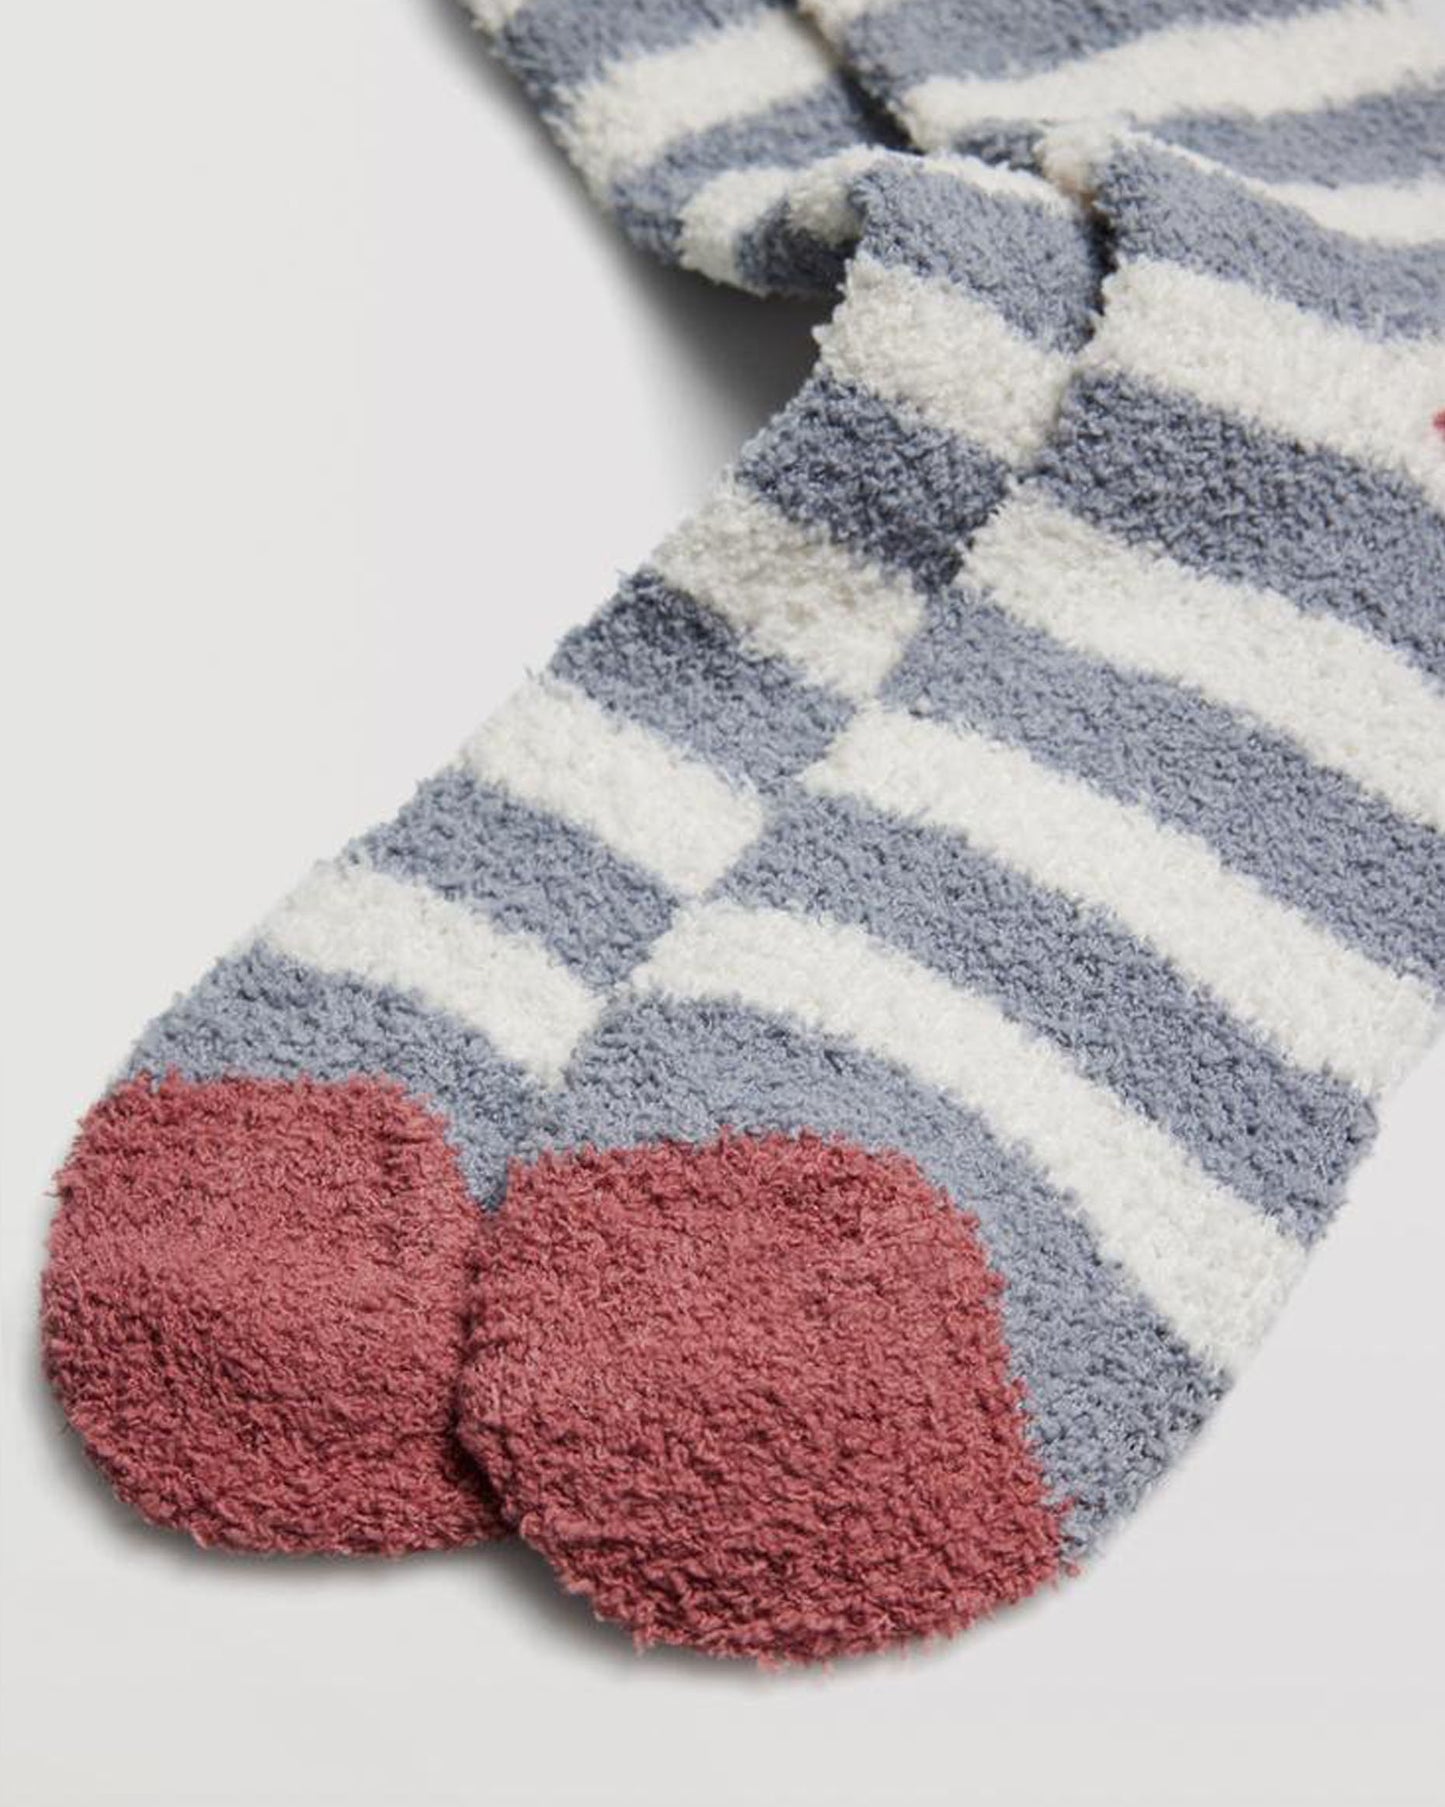 Ysabel Mora 12890 Fluffy Stripe Socks - Warm and fluffy house socks with a light grey and cream horizontal stripe pattern, terracotta heel and toe and anti-pressure cuff.